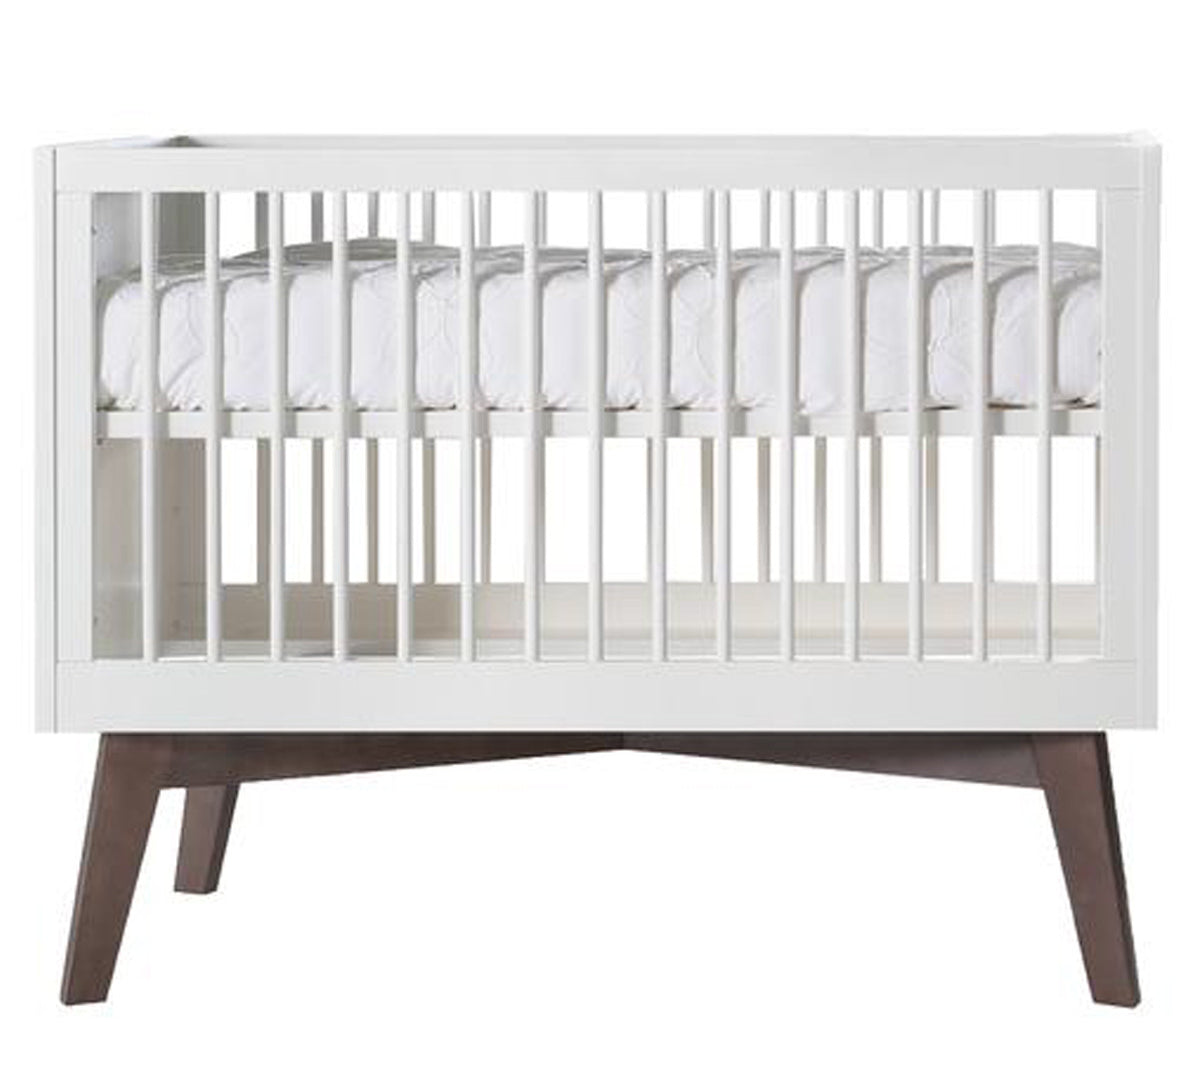 Deer Industries Baby Bed Nursery furniture Sixties matte white in combination with a dark wooden base. Cot and cot bed with standard European mattress size 60x120 or 70x140. Made in Europe complies with all European safety regulations. Stylish baby crib contemporary but a bit retro. Gender neutral for baby boy and baby girl and for toddler as the beds are convertible in both sizes.